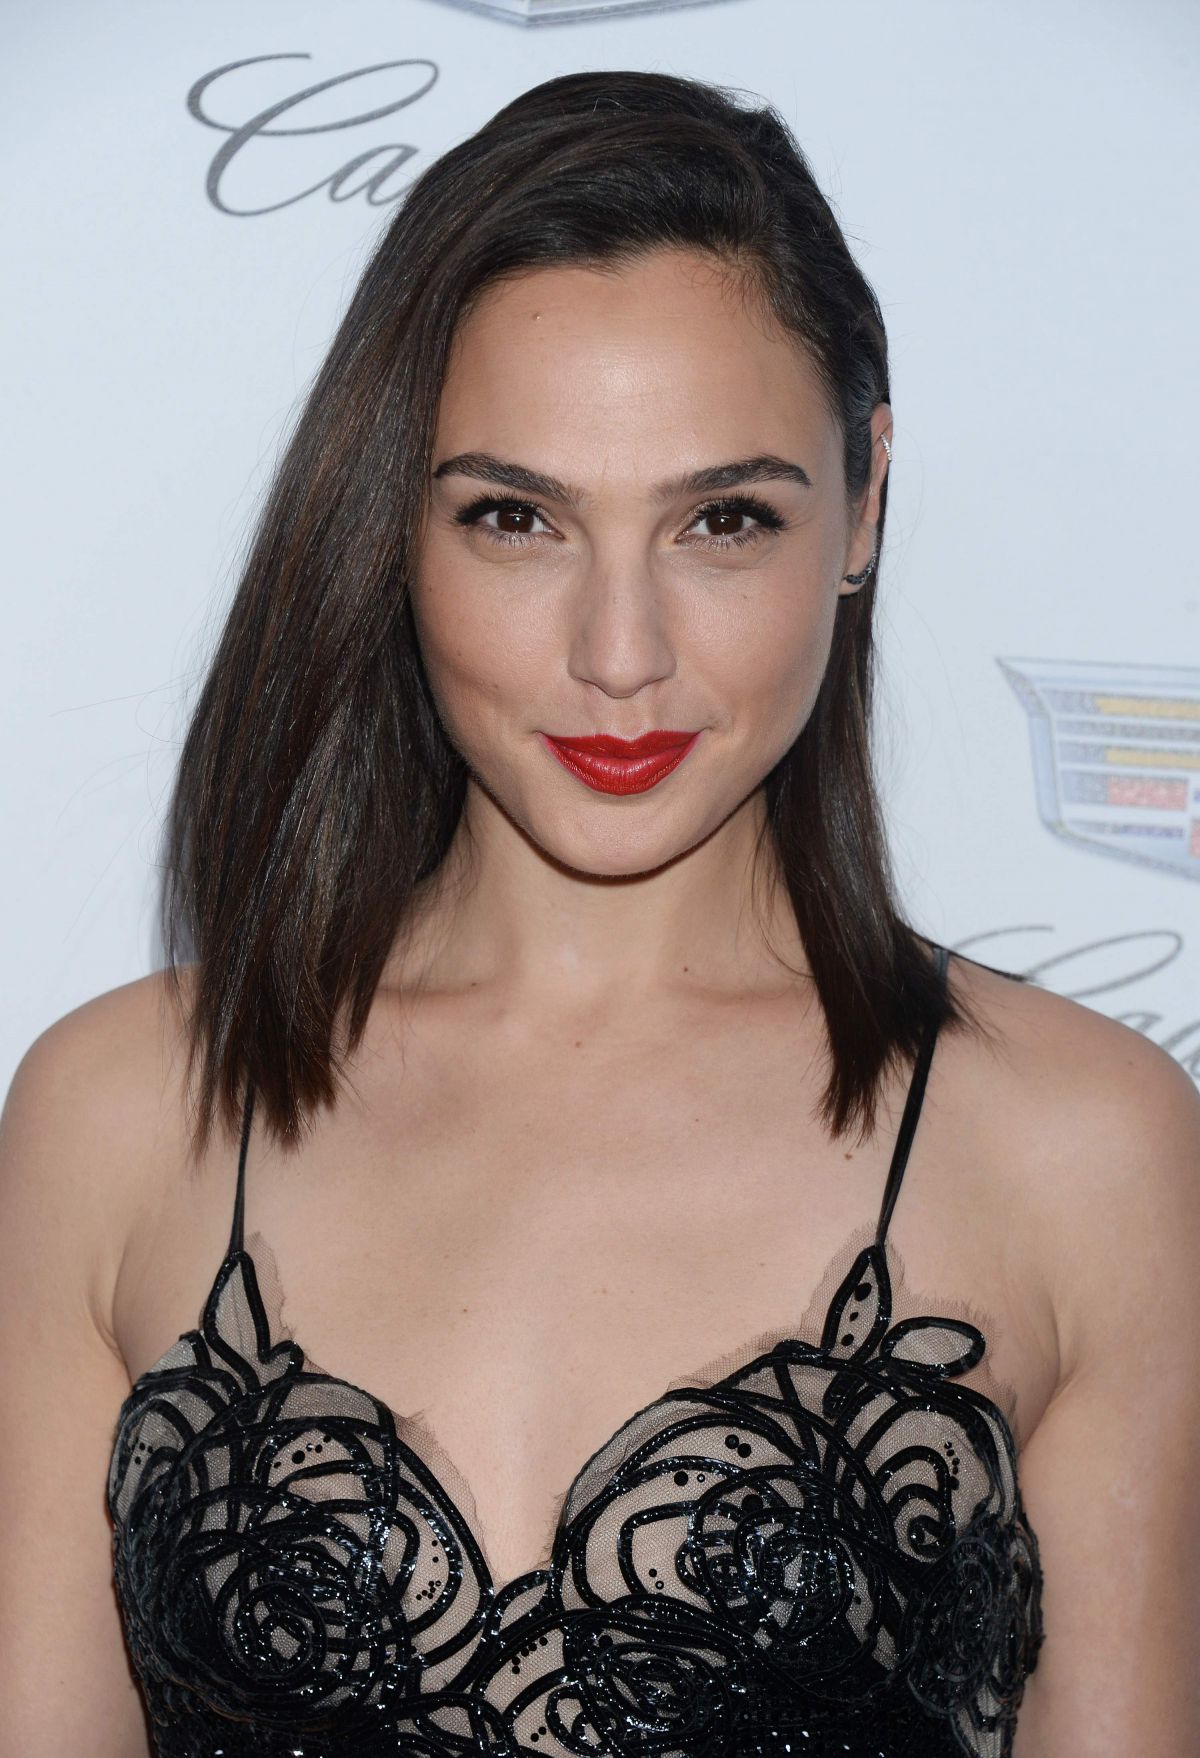 GAL GADOT at Producers Guild Awards 2018 in Beverly Hills 01/20/2018